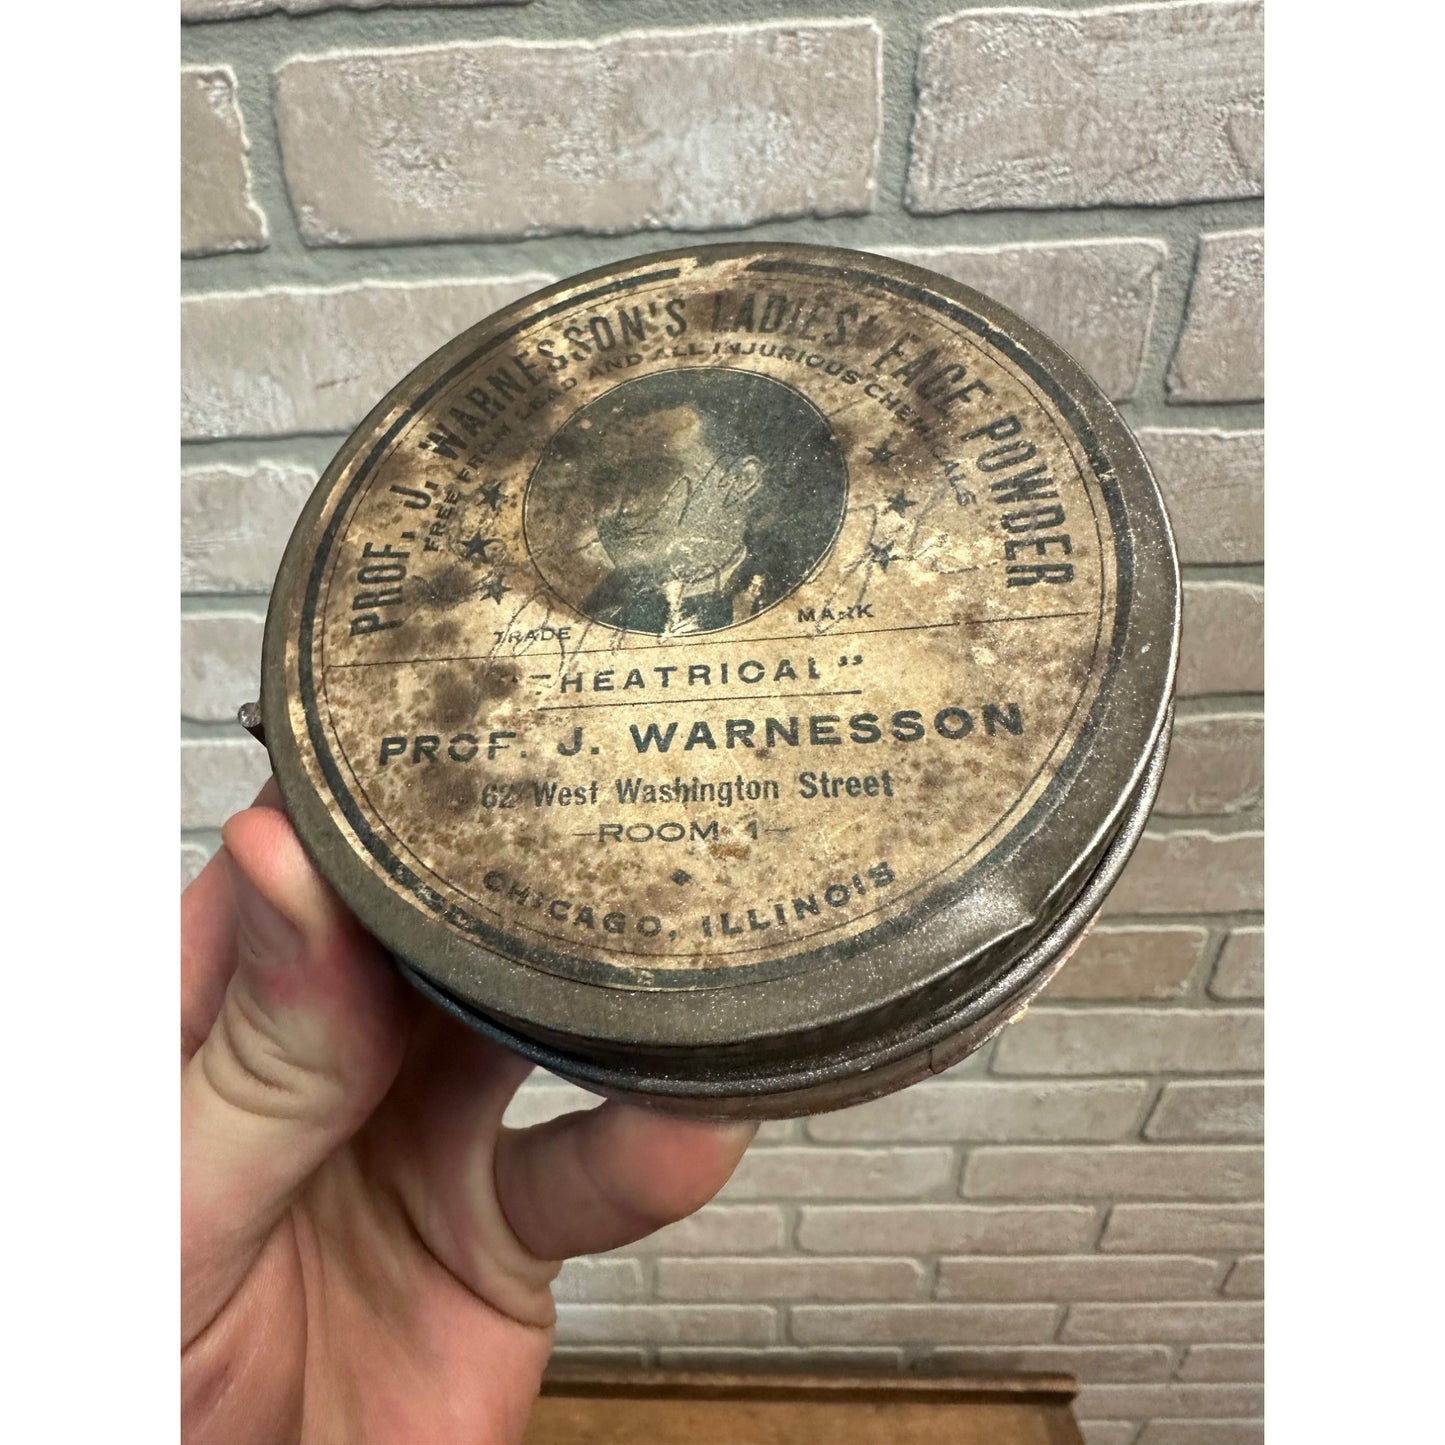 Early 1900s Vintage J. Warnesson Ladies Theatrical Face Powder Makeup Tin Can